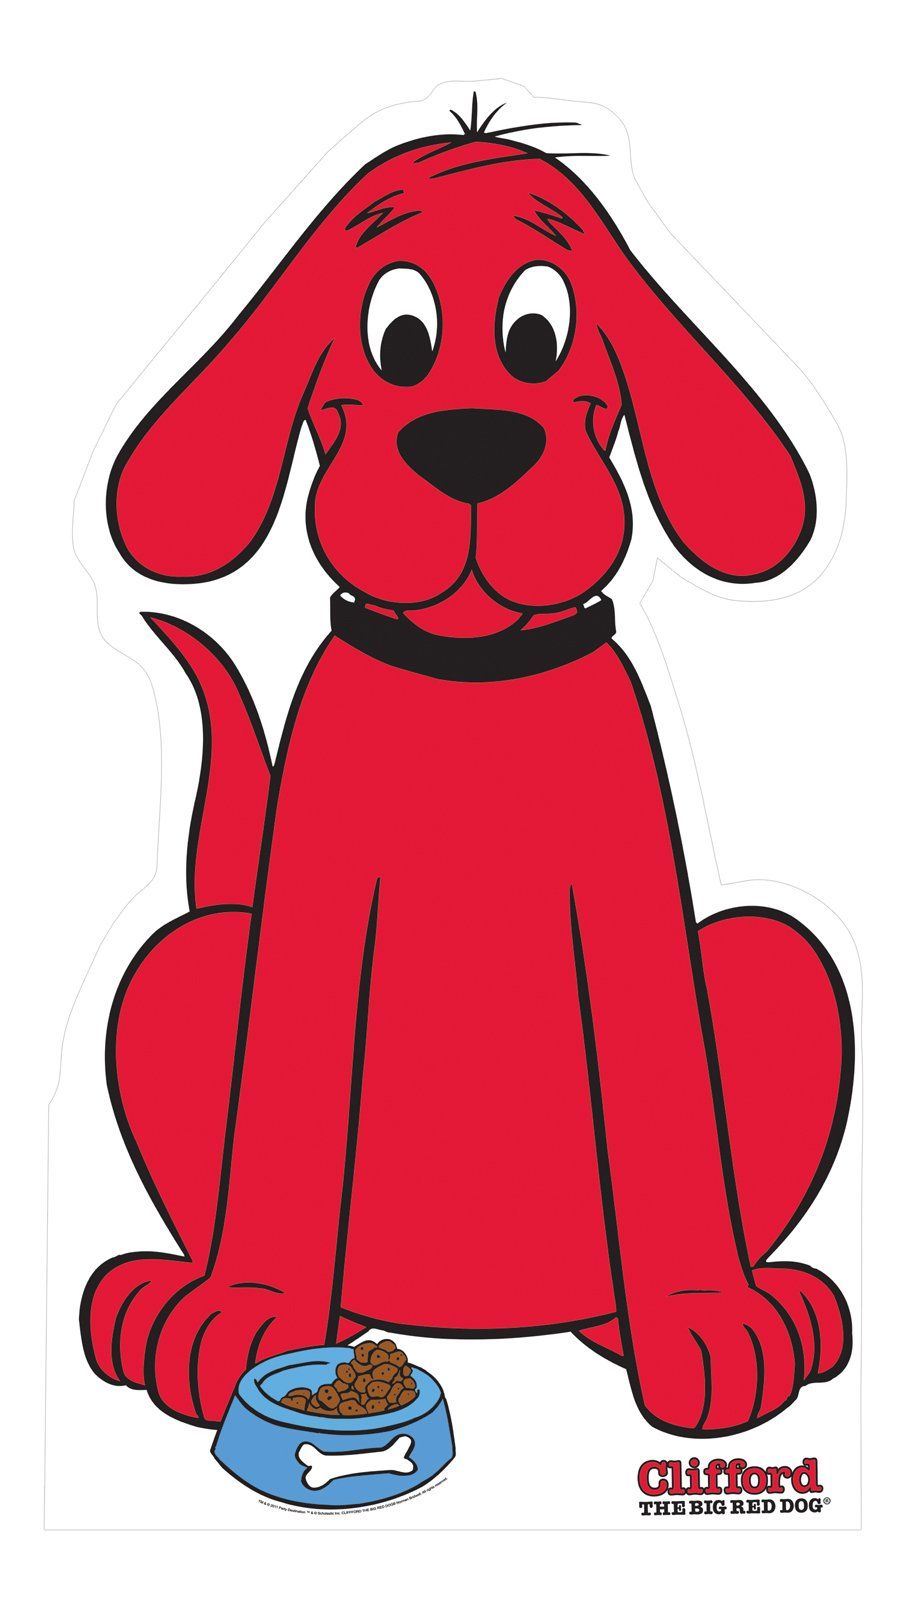 Clifford The Big Red Dog.